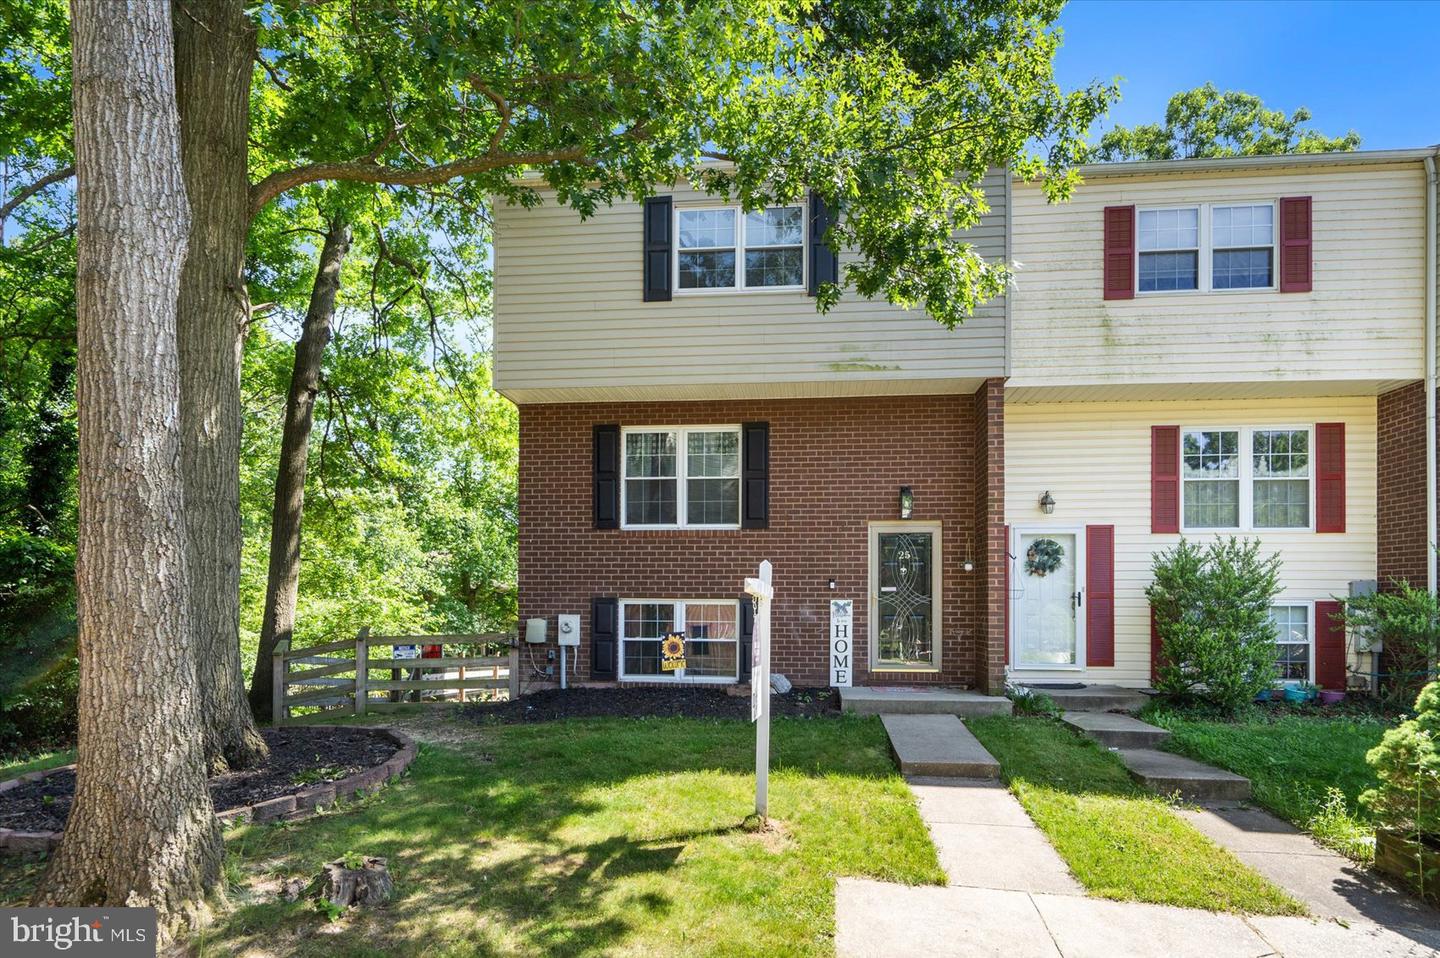 View Nottingham, MD 21236 townhome